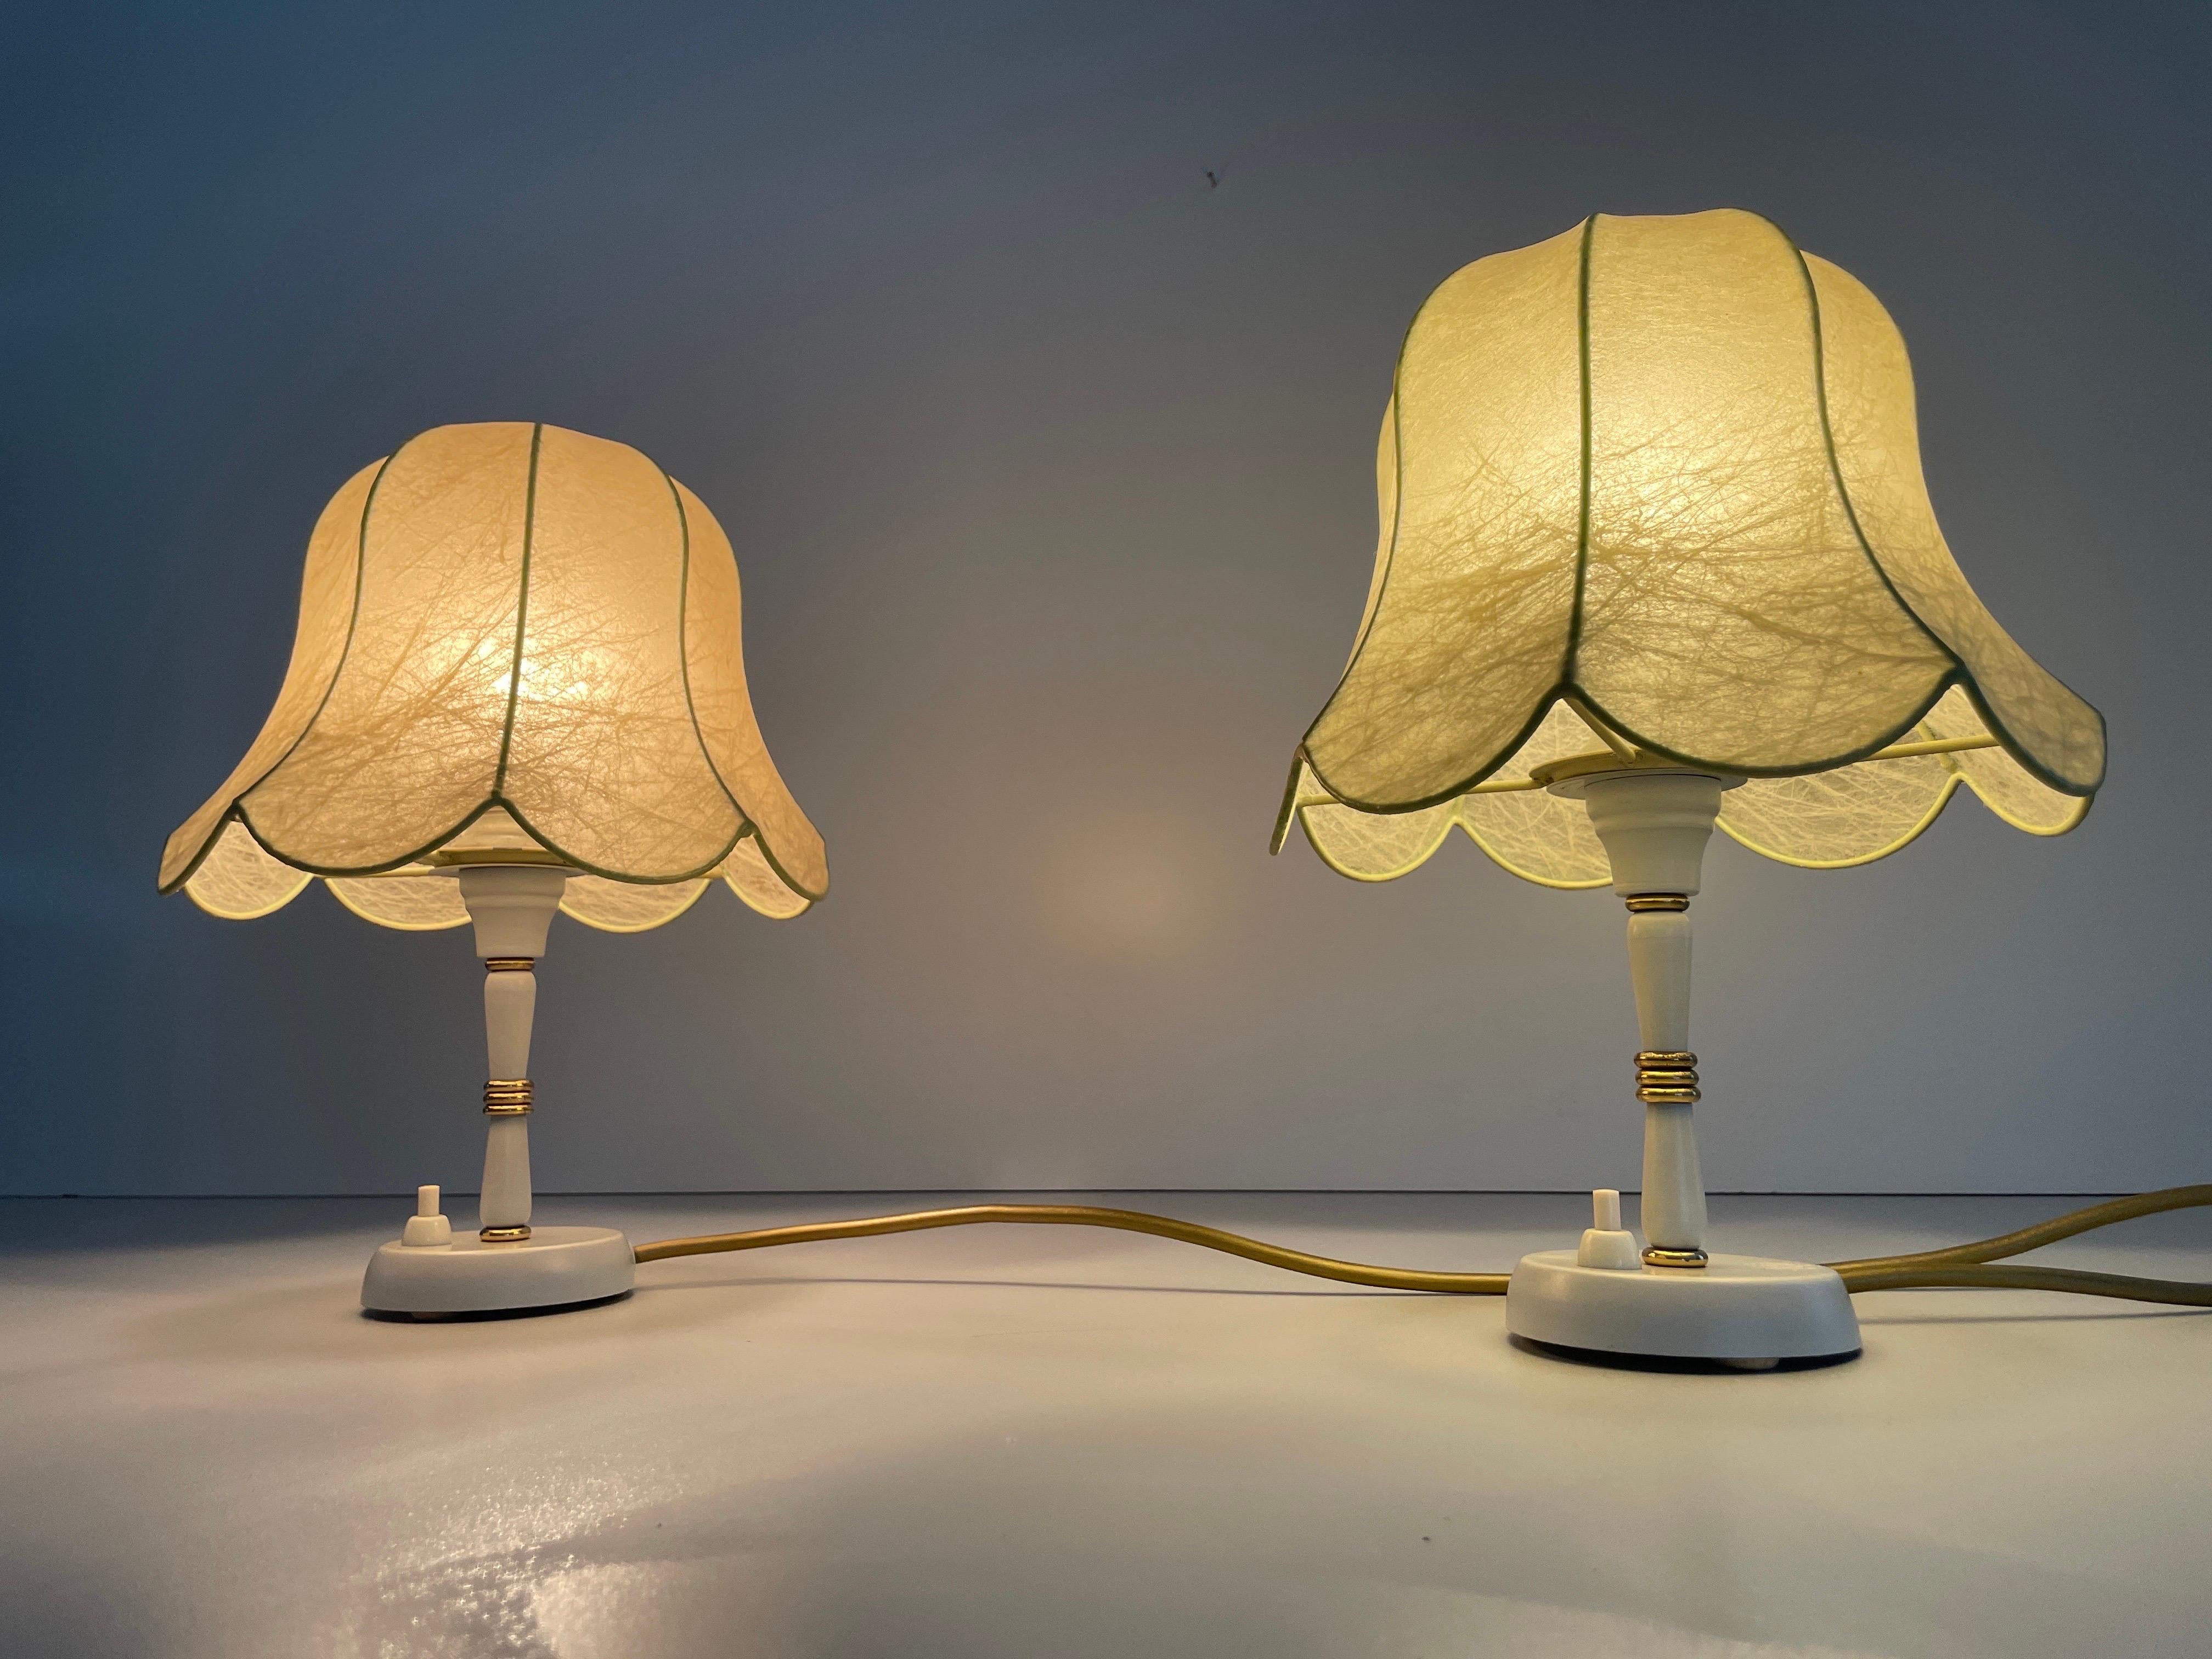 Cocoon Shade Metal Body Pair of Bedside Lamps by GOLDKANT, 1970s, Germany For Sale 5